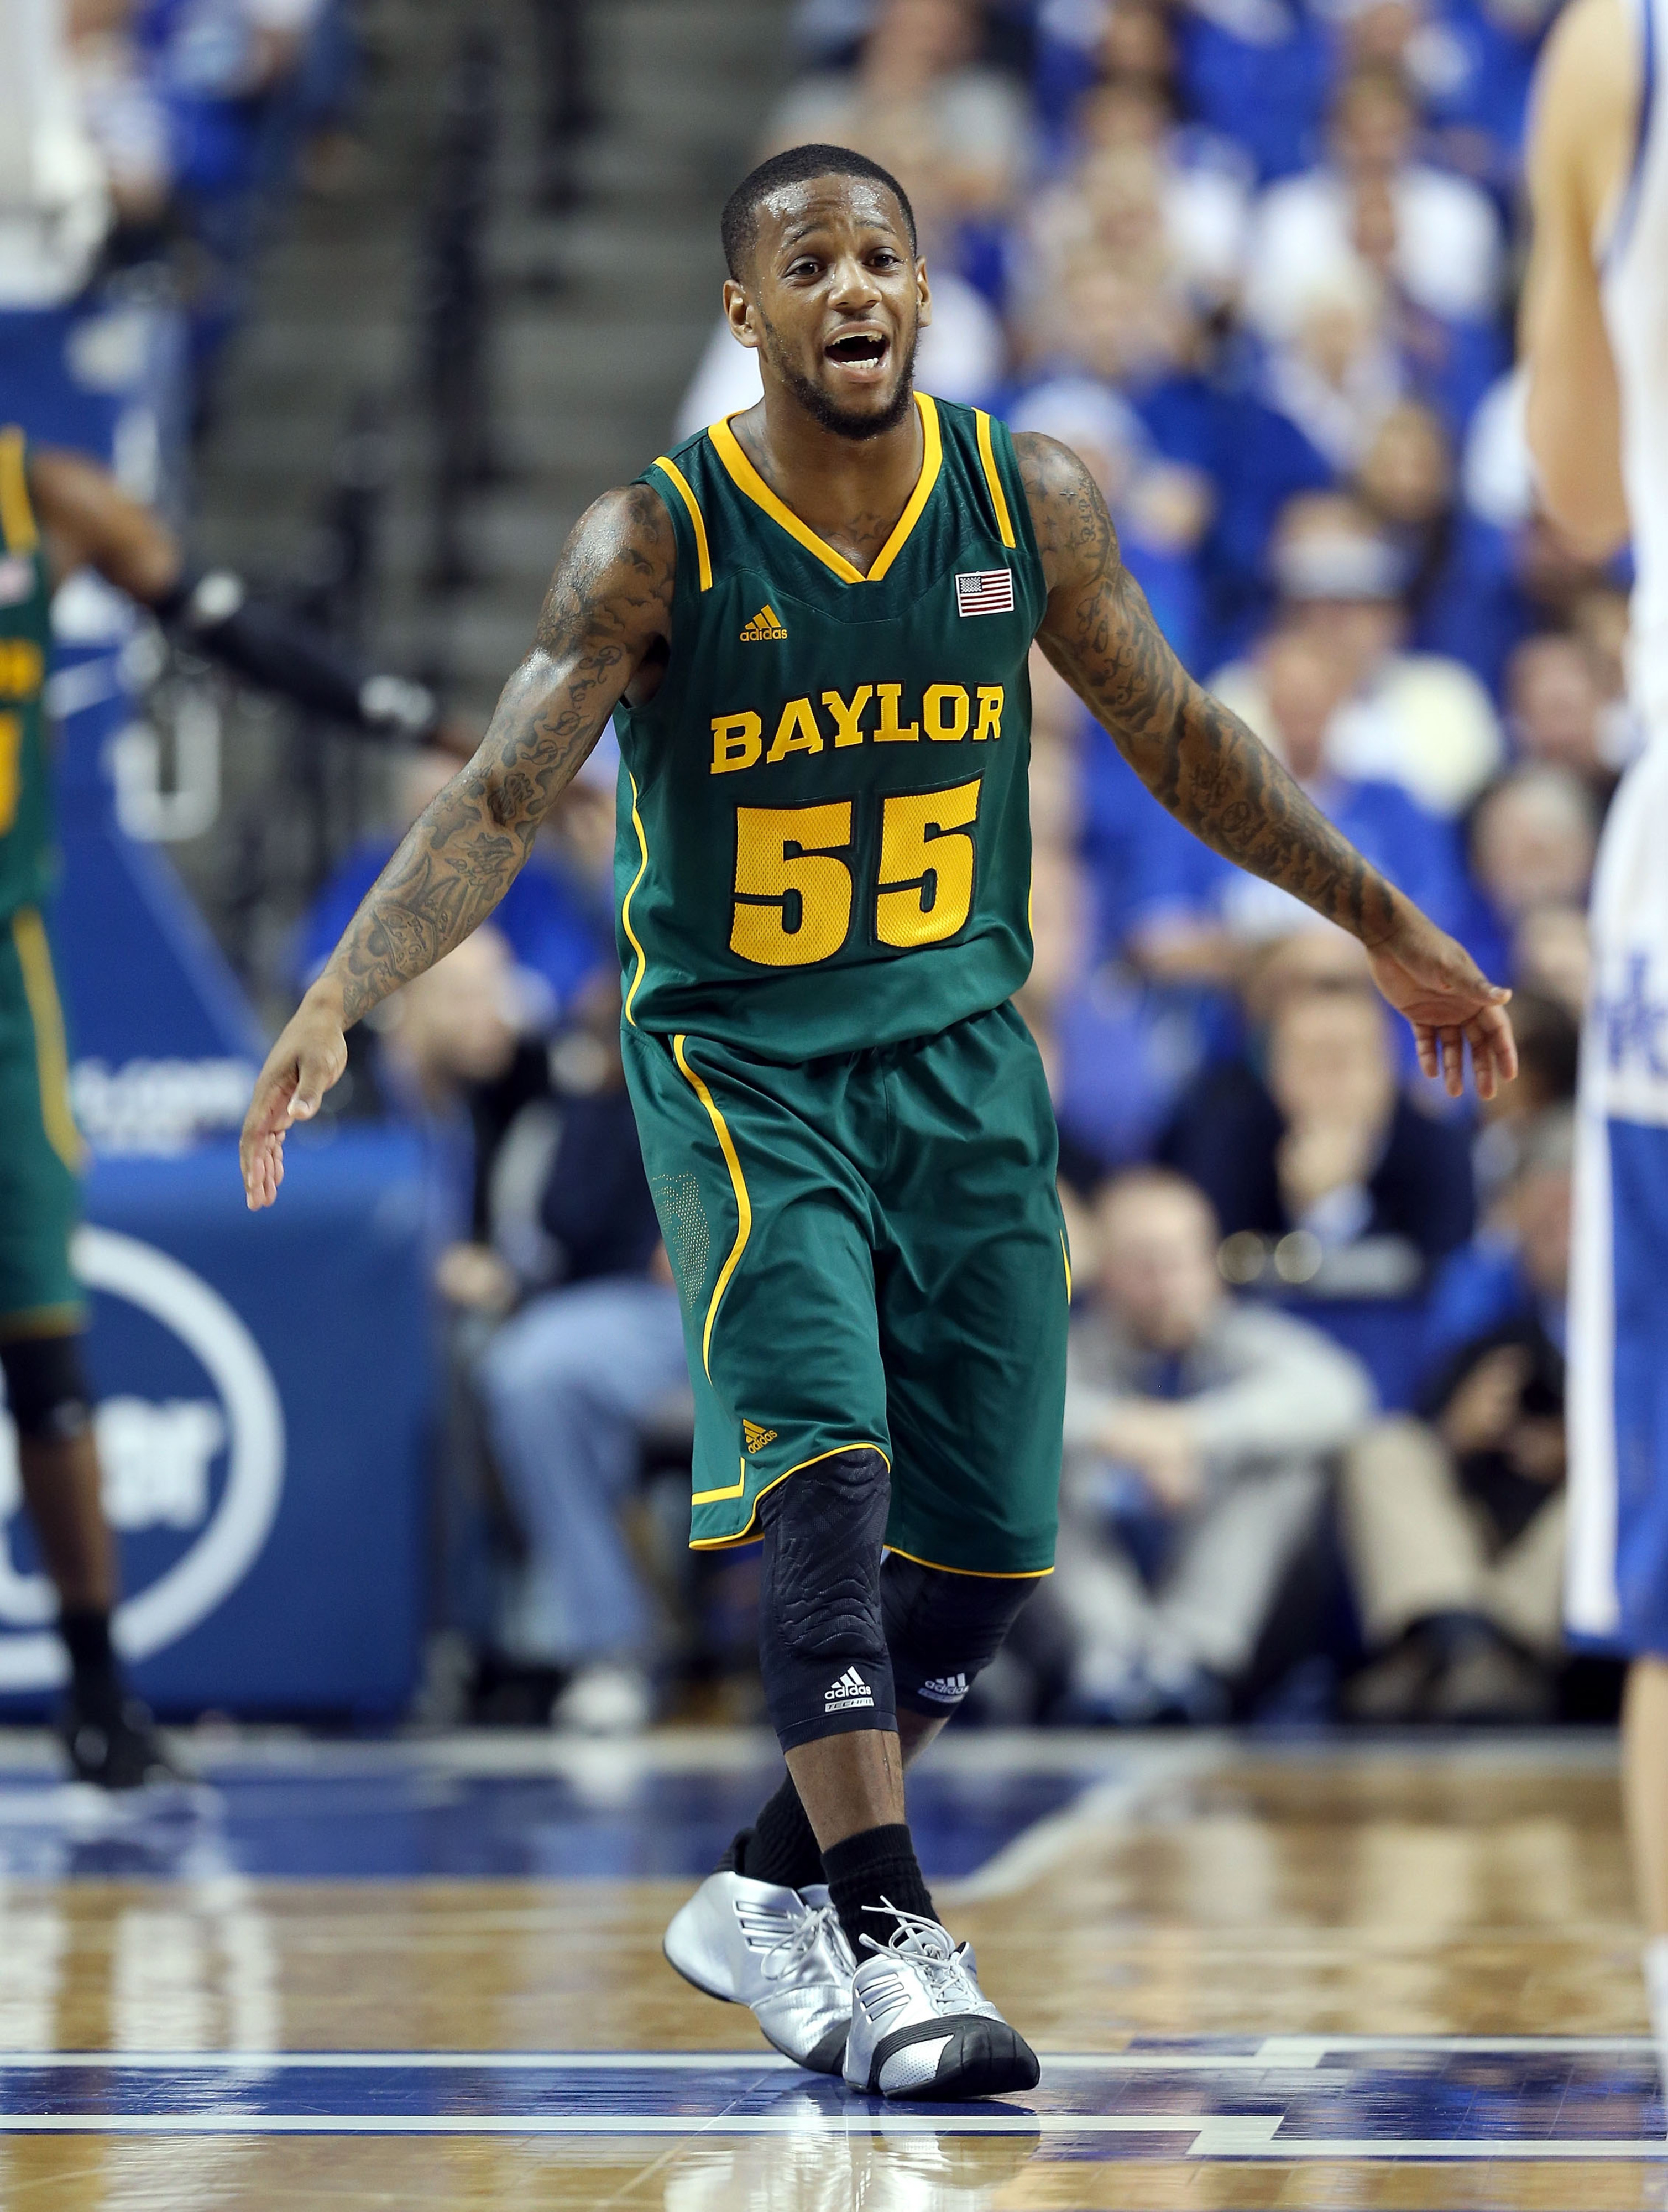 Pierre Jackson likes to shoot the ball and win games. He also wears cool shoes.